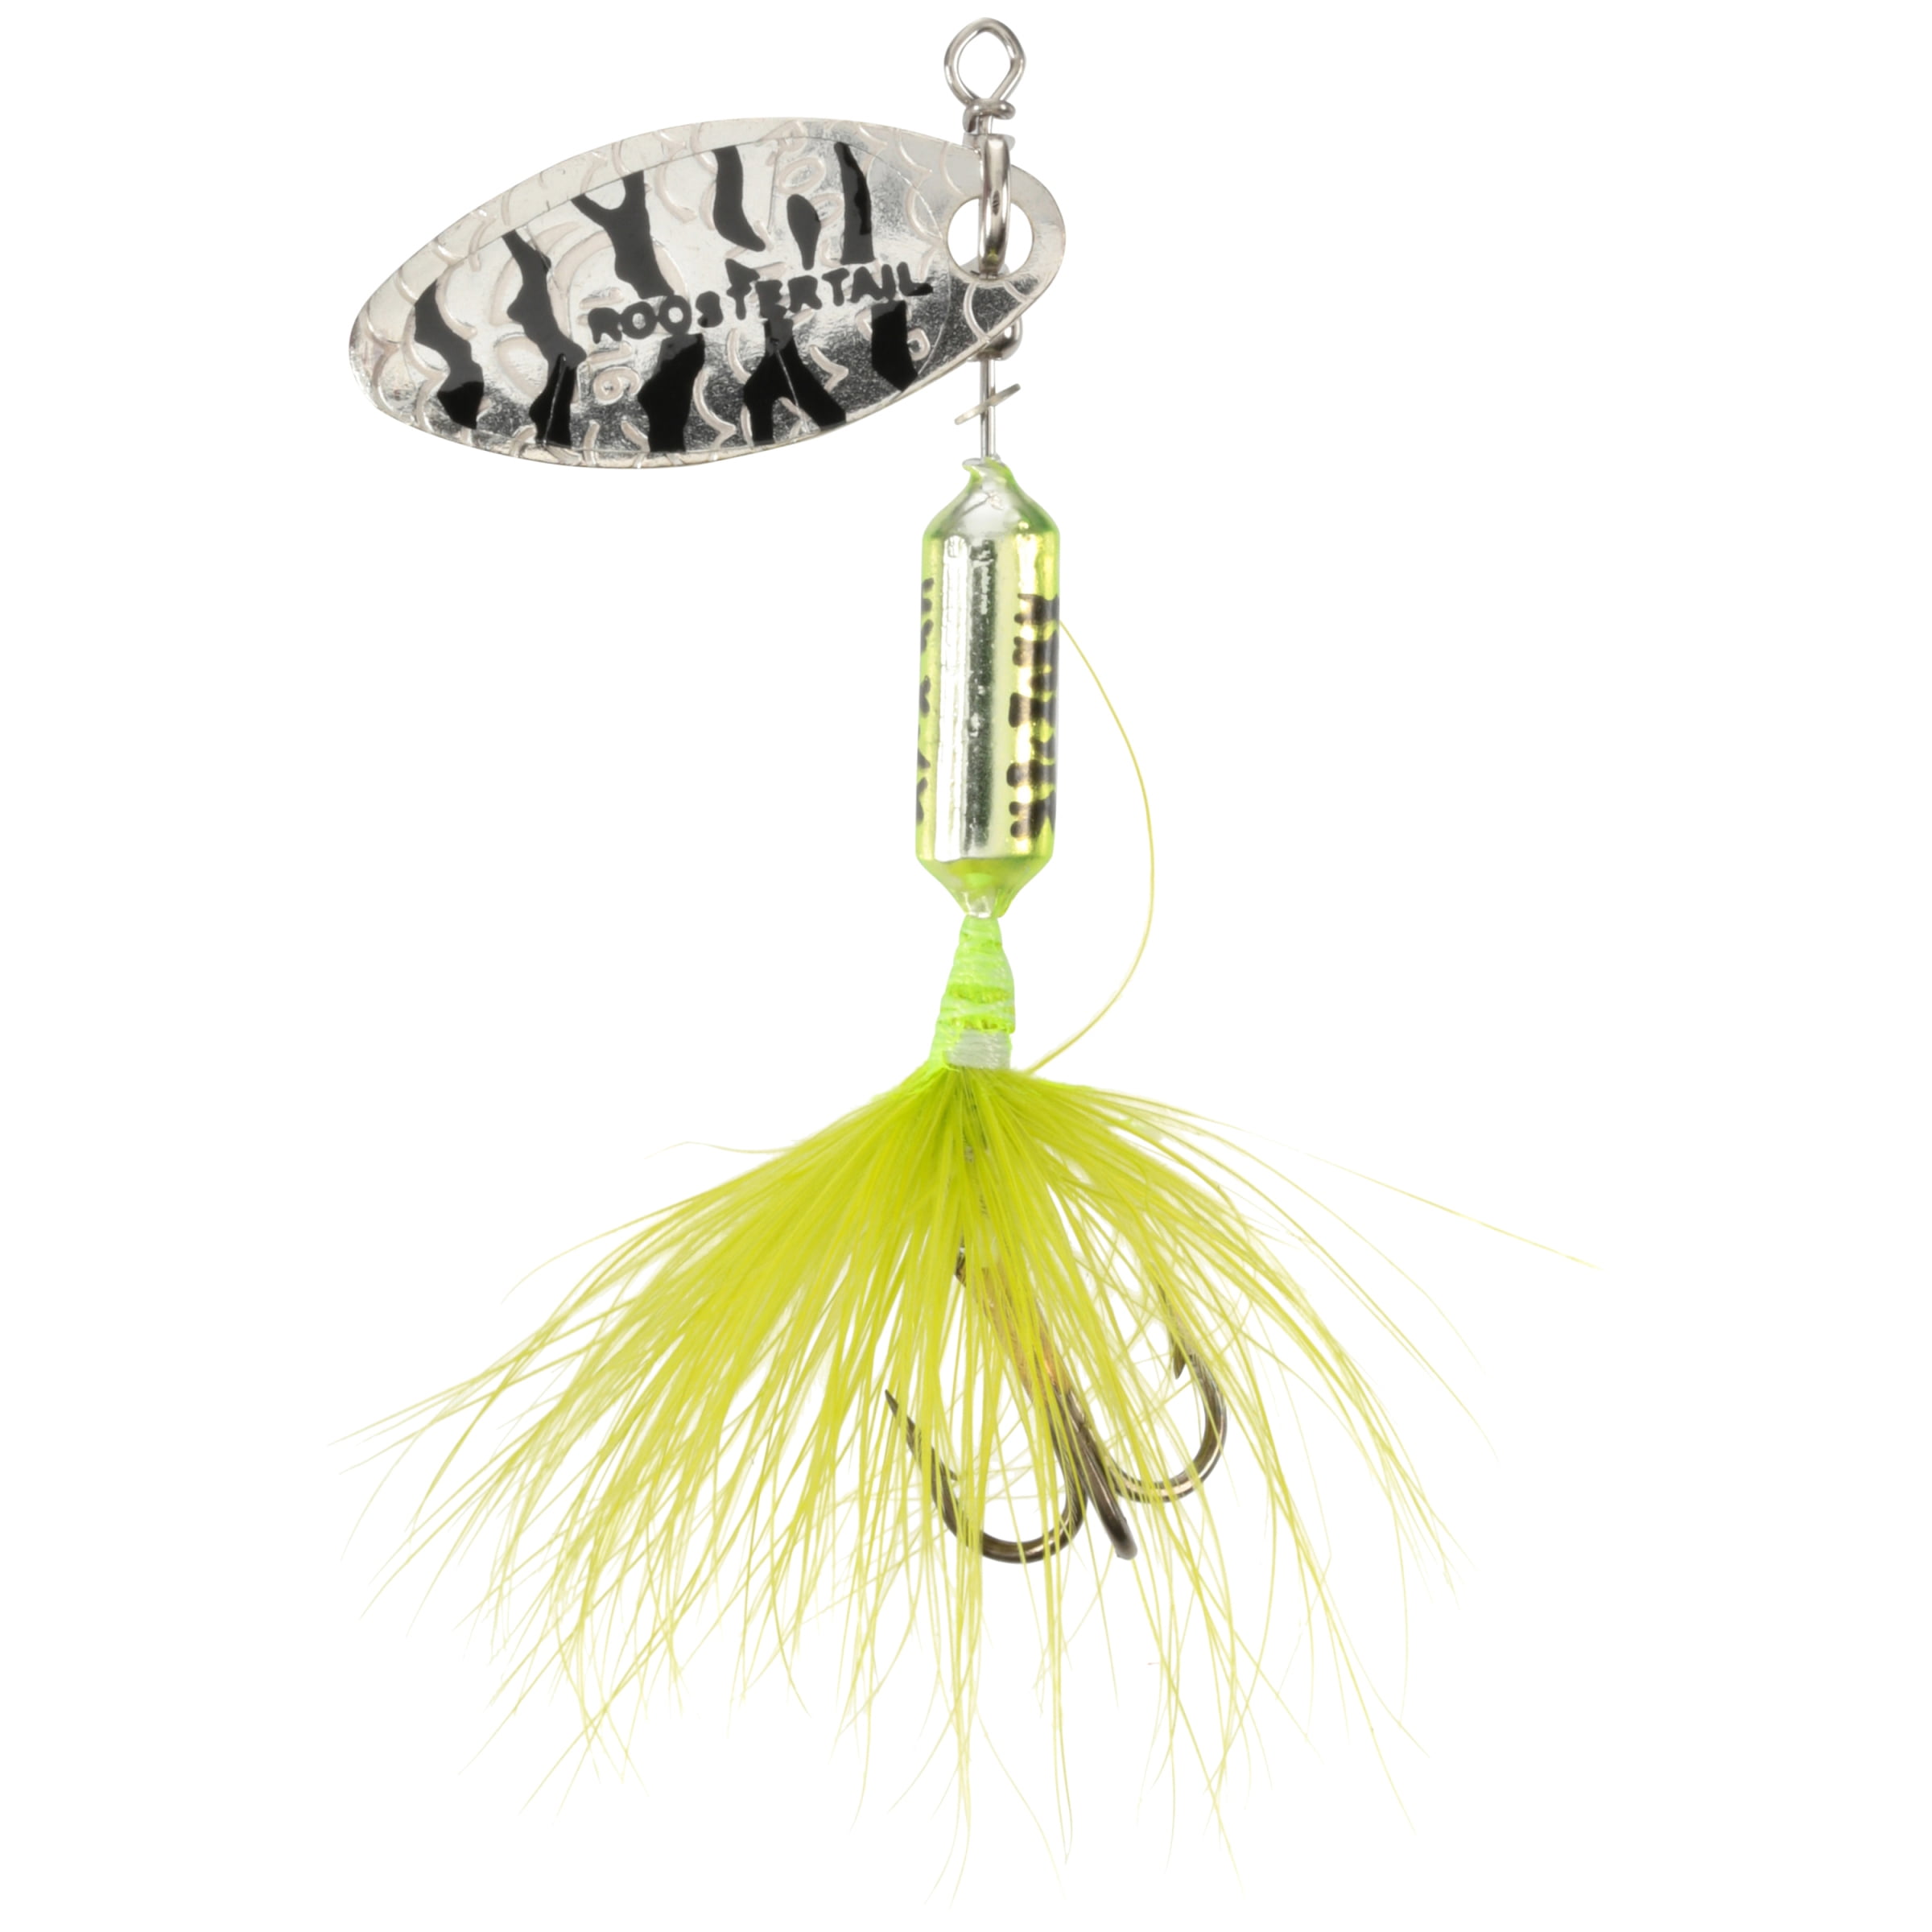 Worden's® Original Rooster Tail®, Inline Spinnerbait Fishing Lure, 1/16 oz.  Metallic Chartreuse Tiger